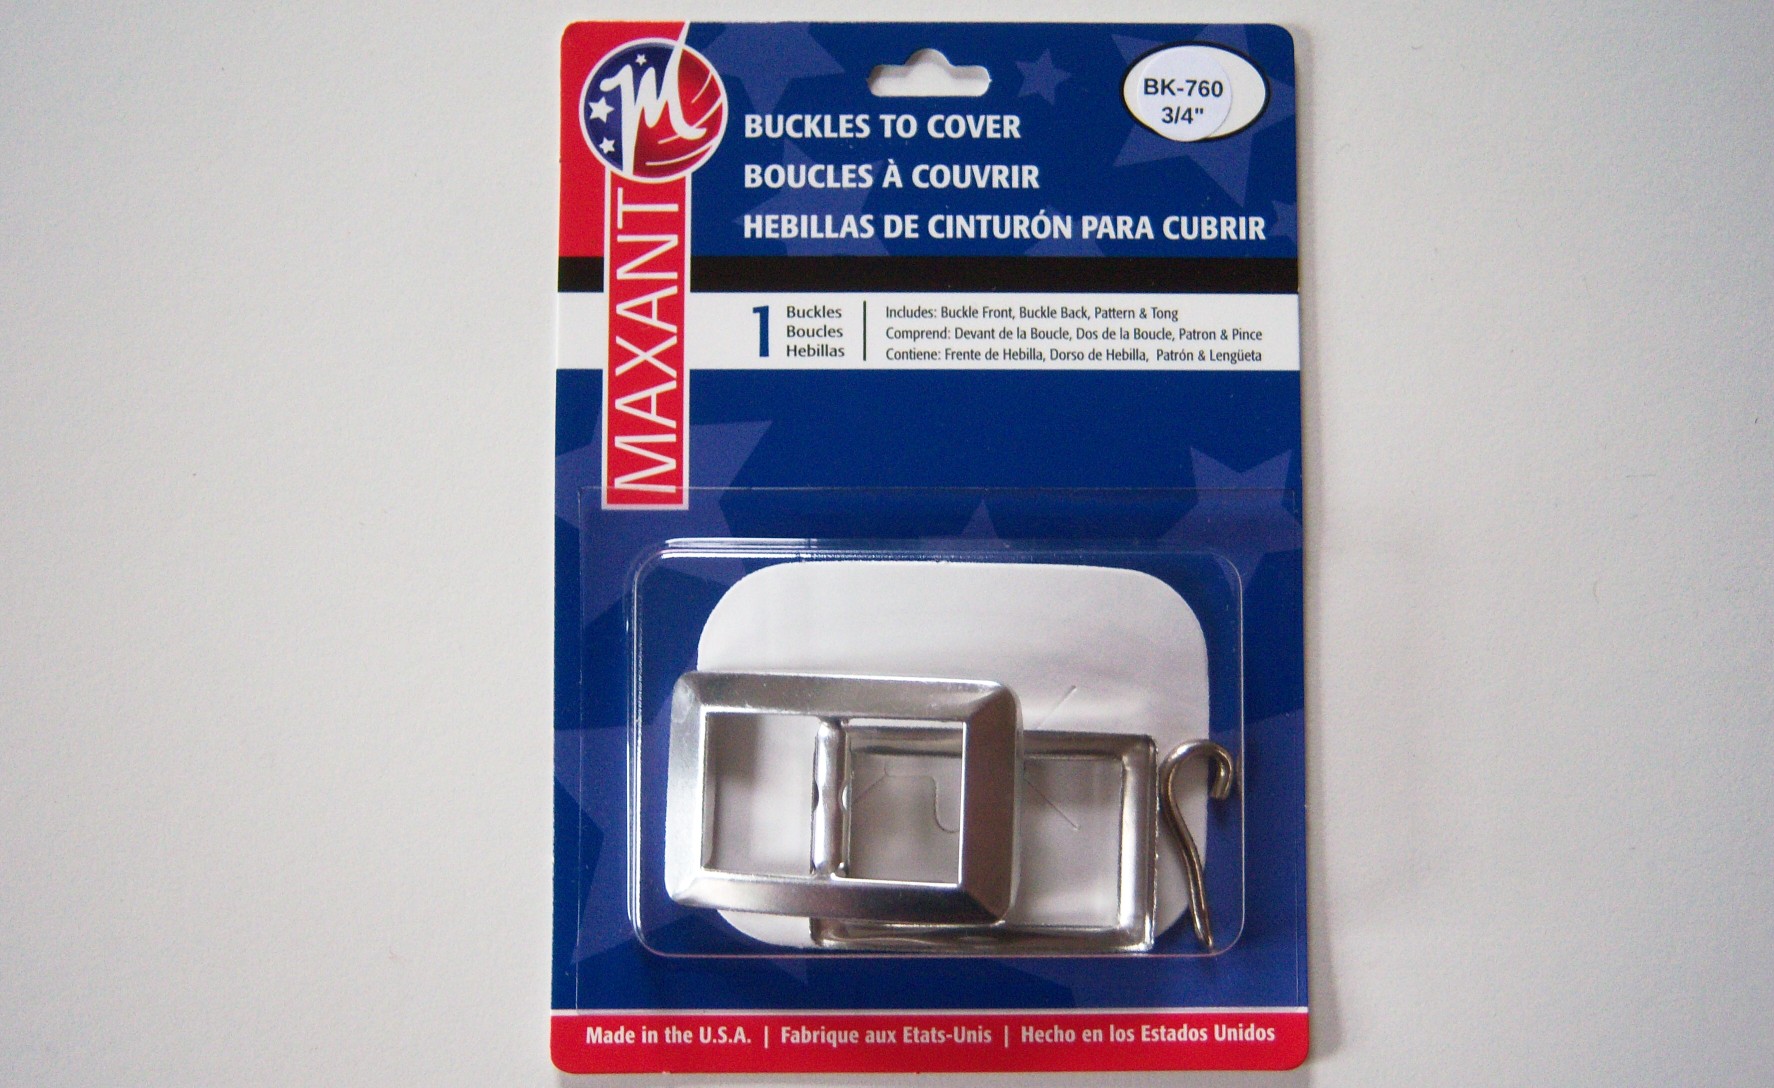 BK-760 Maxant 3/4" Buckle To Cover